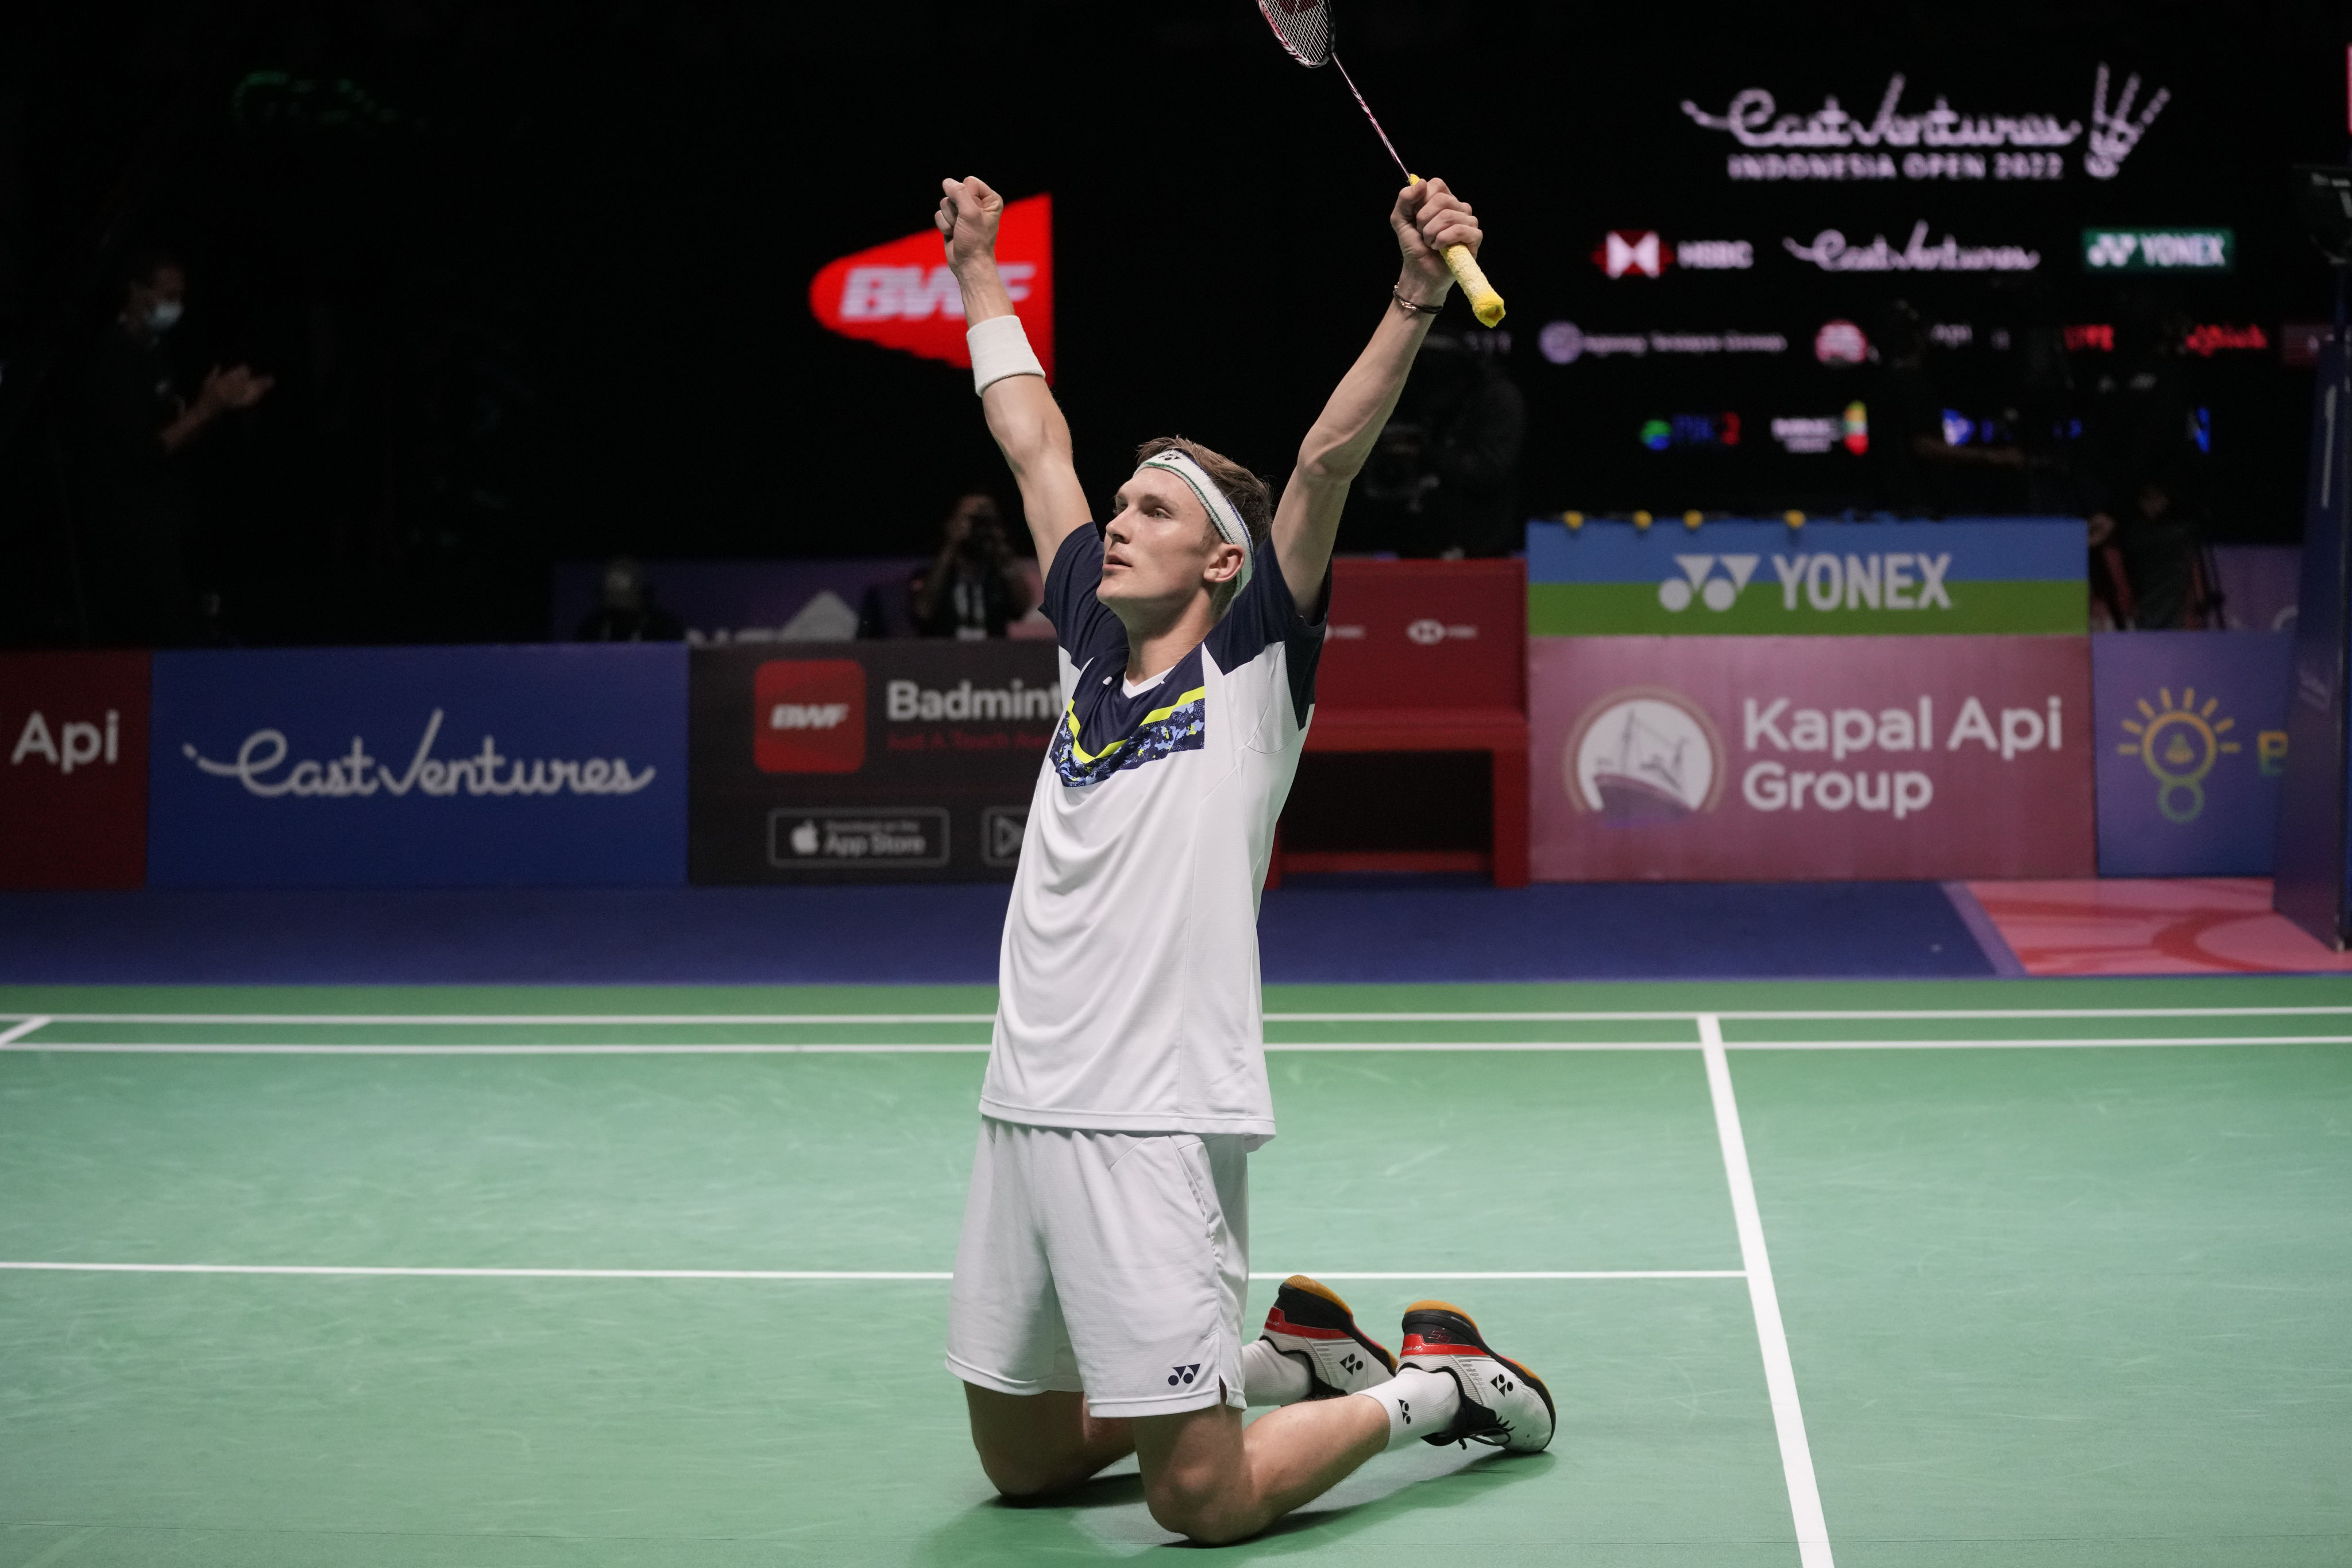 Viktor Axelsen, Tai Tzu Ying win Indonesia Open titles as BWF World Tour expansion revealed South China Morning Post